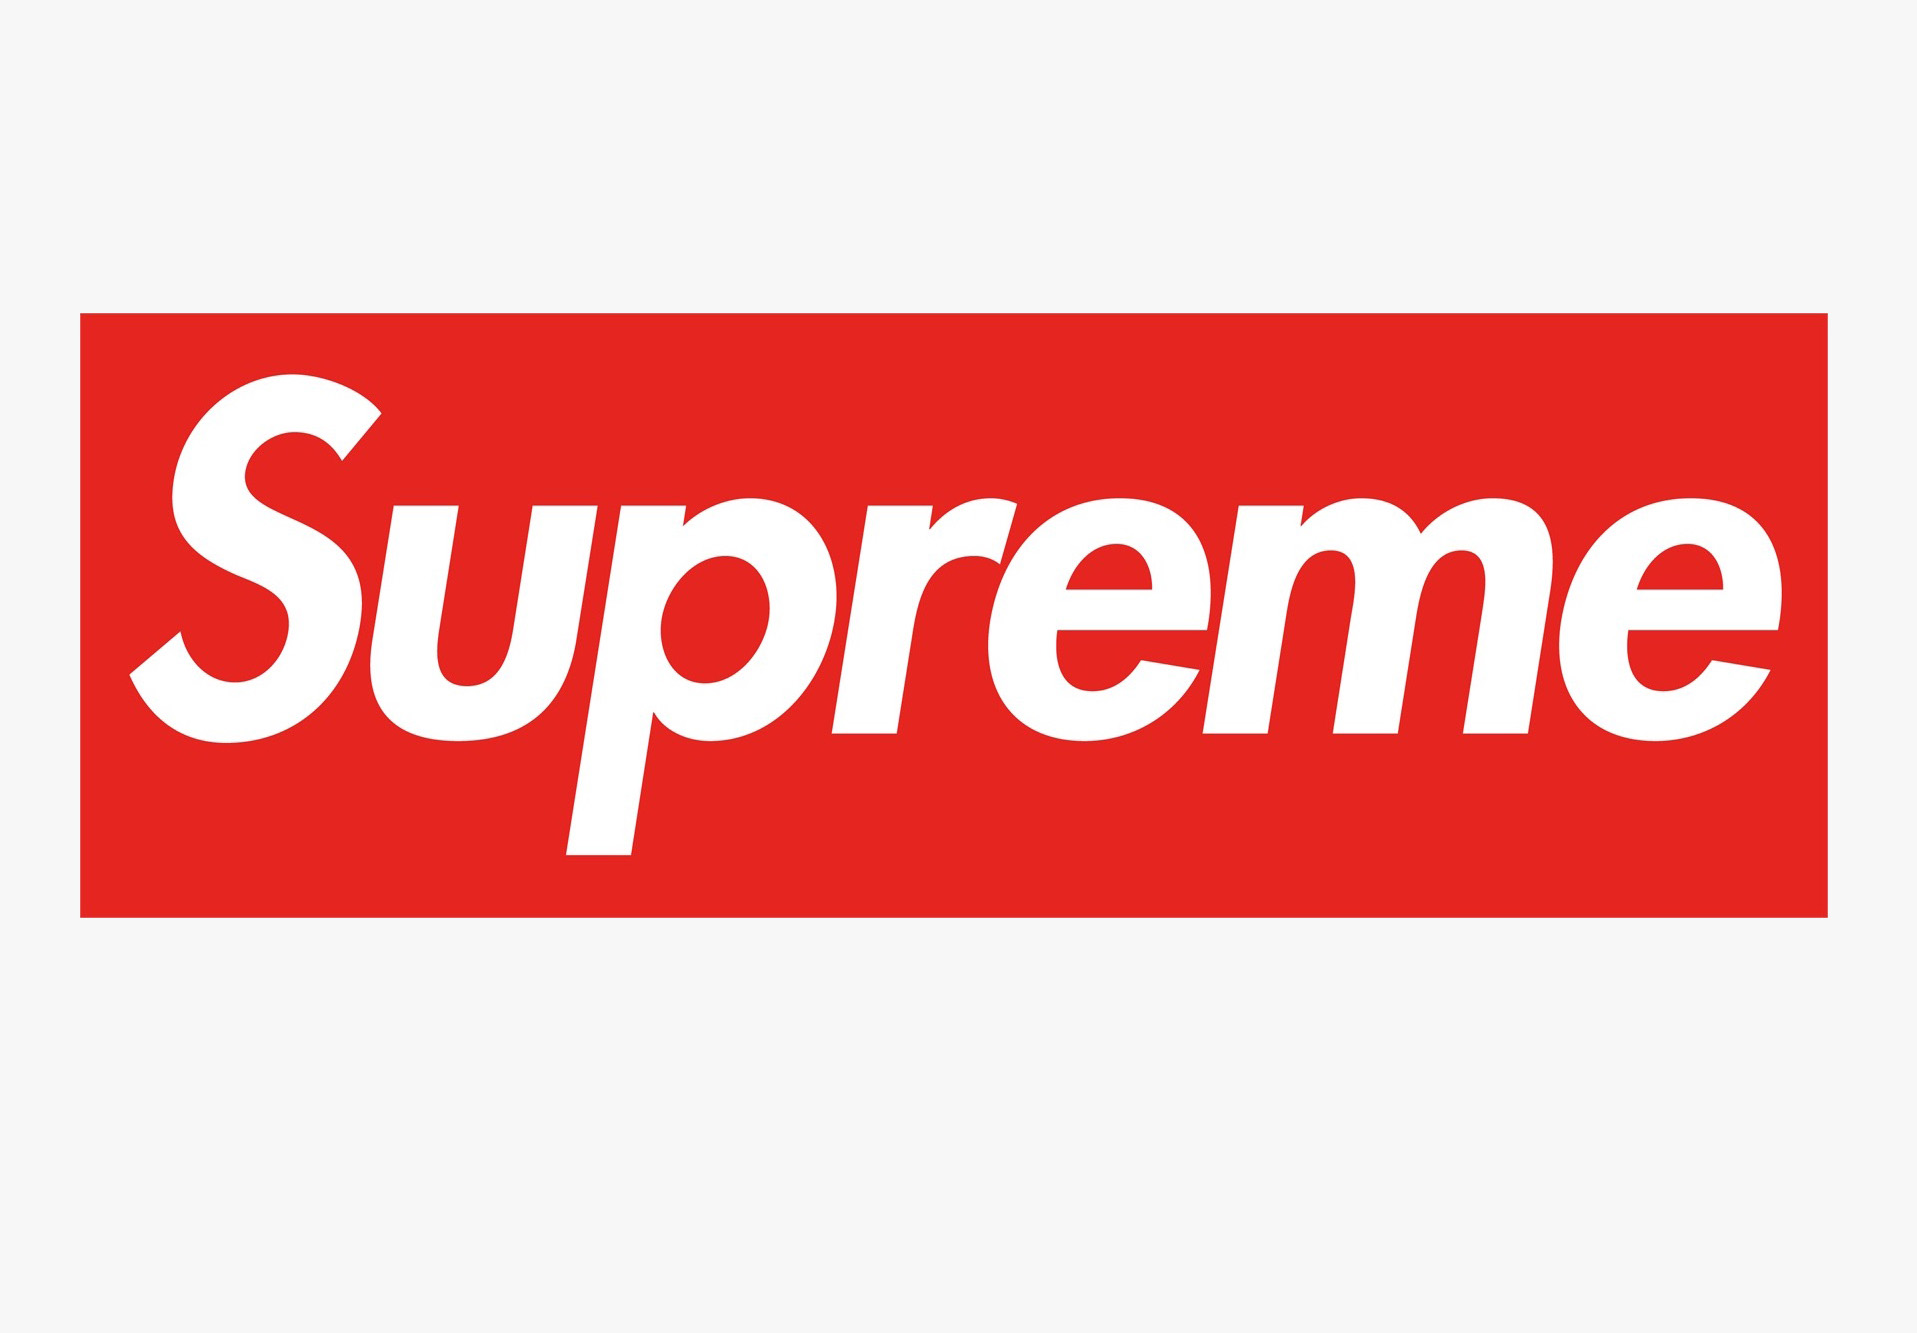 Art or Commerce? Supreme and the Unholy Power of an Iconic Logo